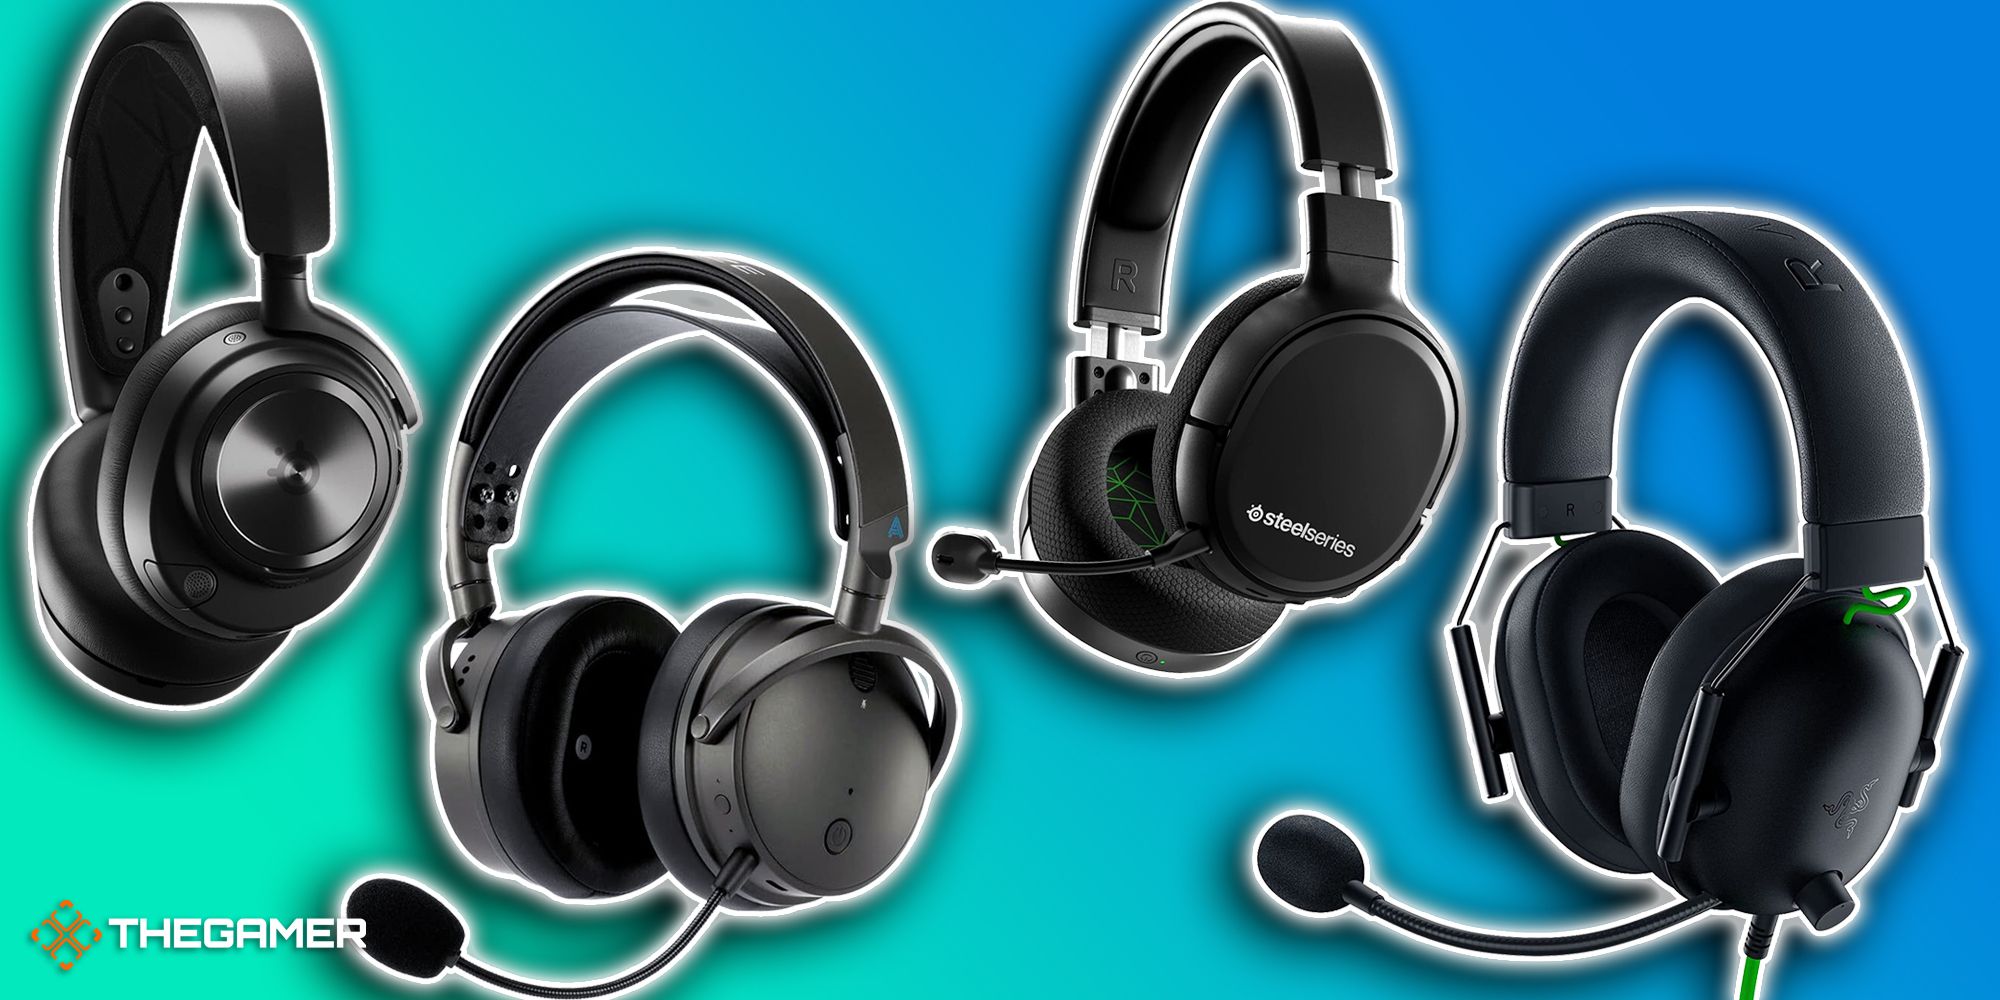 3 best xbox headsets